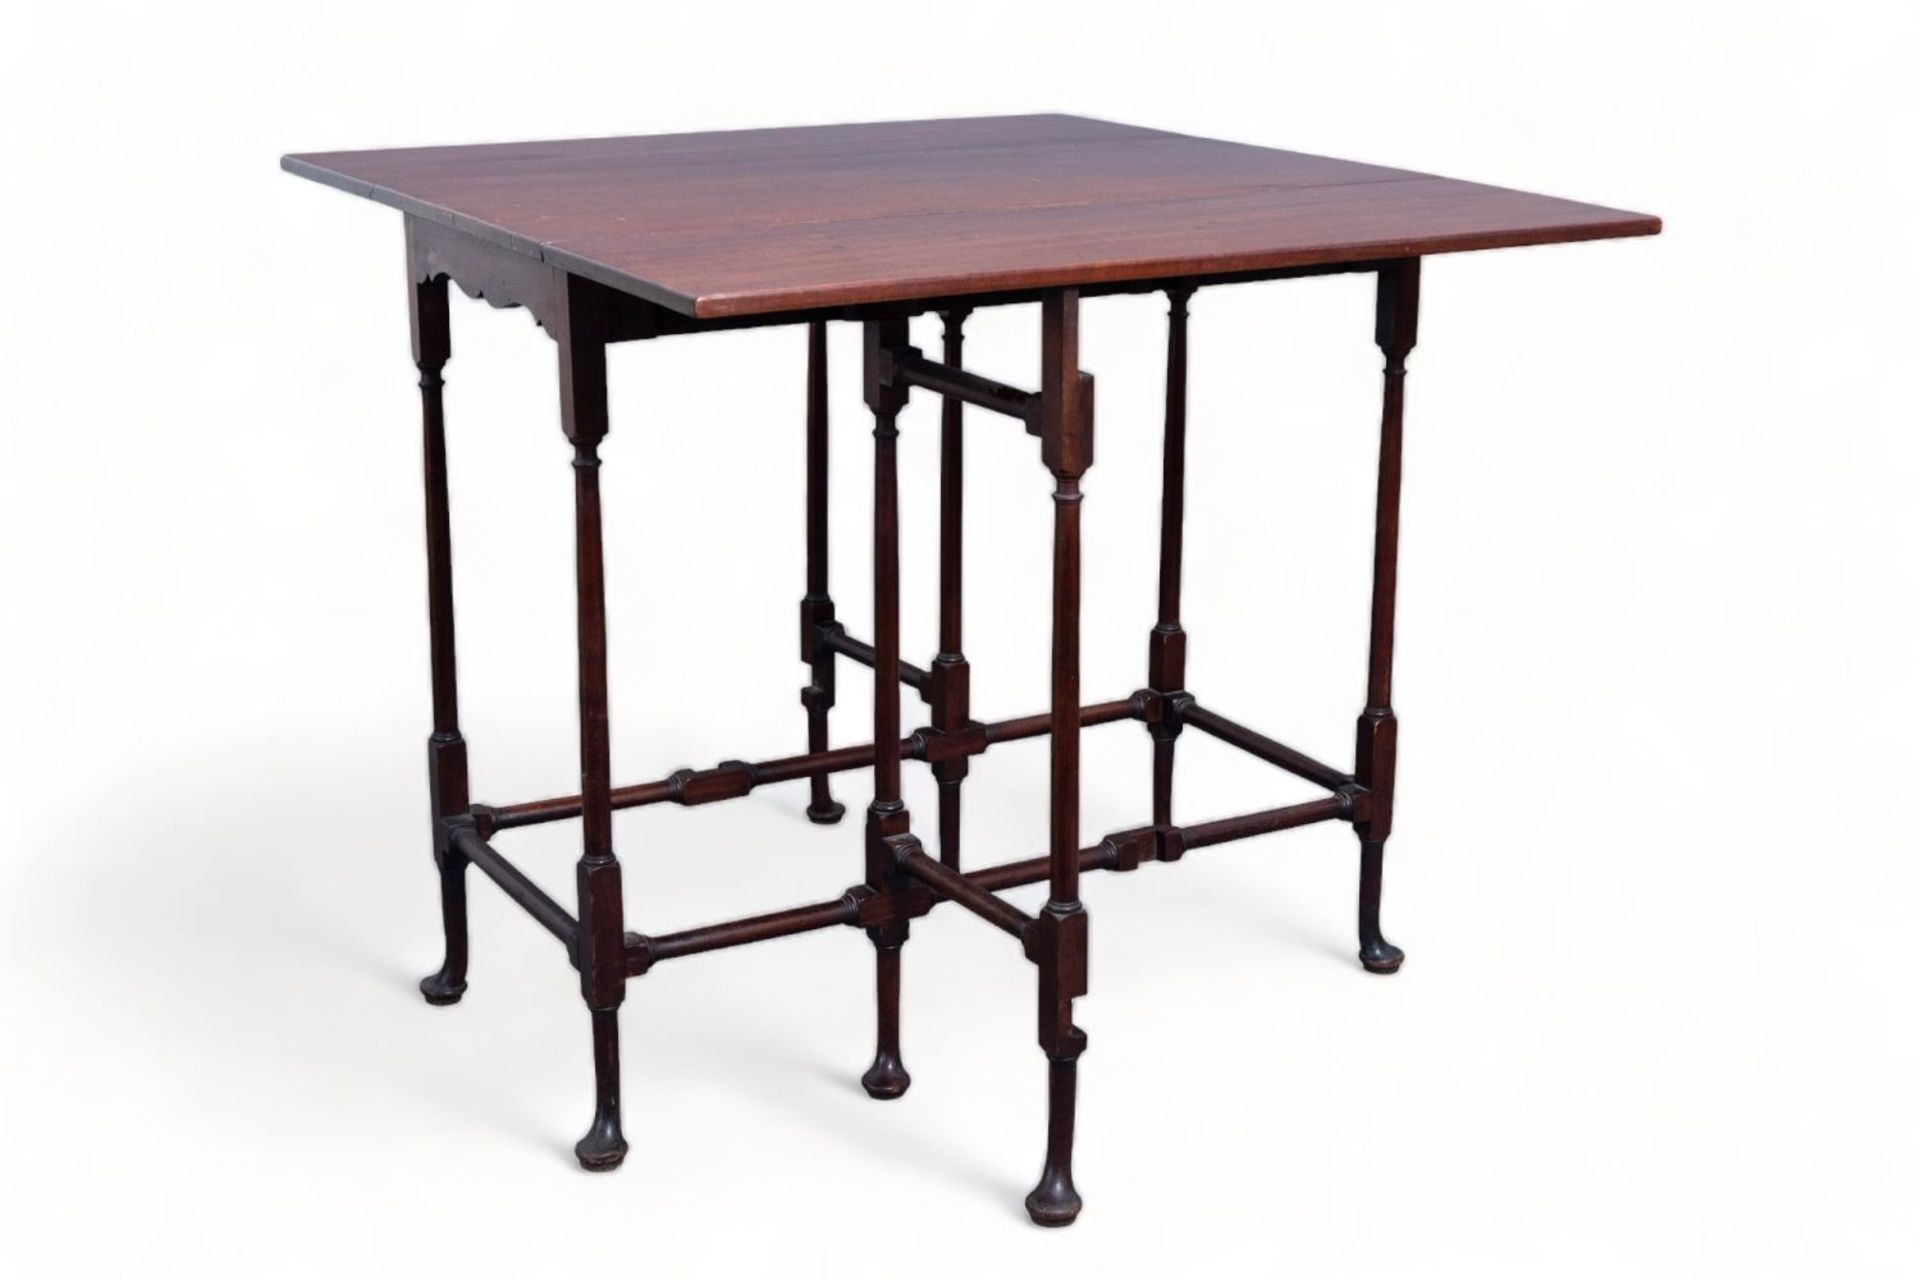 An English George III mahogany spider-leg table by Thomas Chippendale (1718-1779), third quarter of  - Image 2 of 7